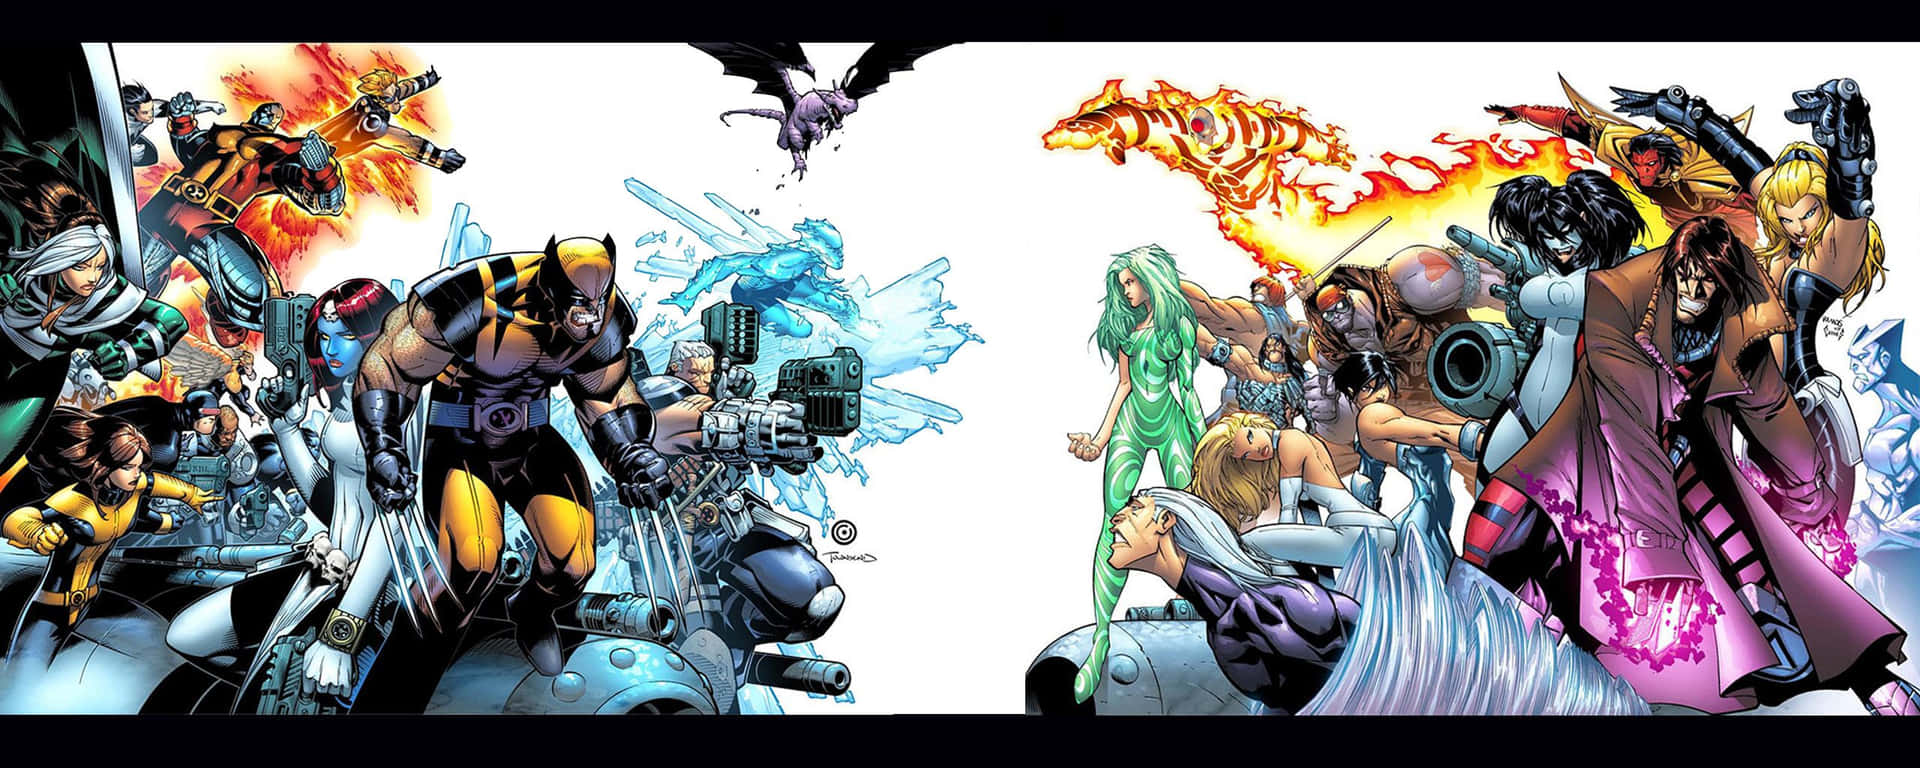 A Group Of Comic Characters Are Shown In A Comic Book Wallpaper